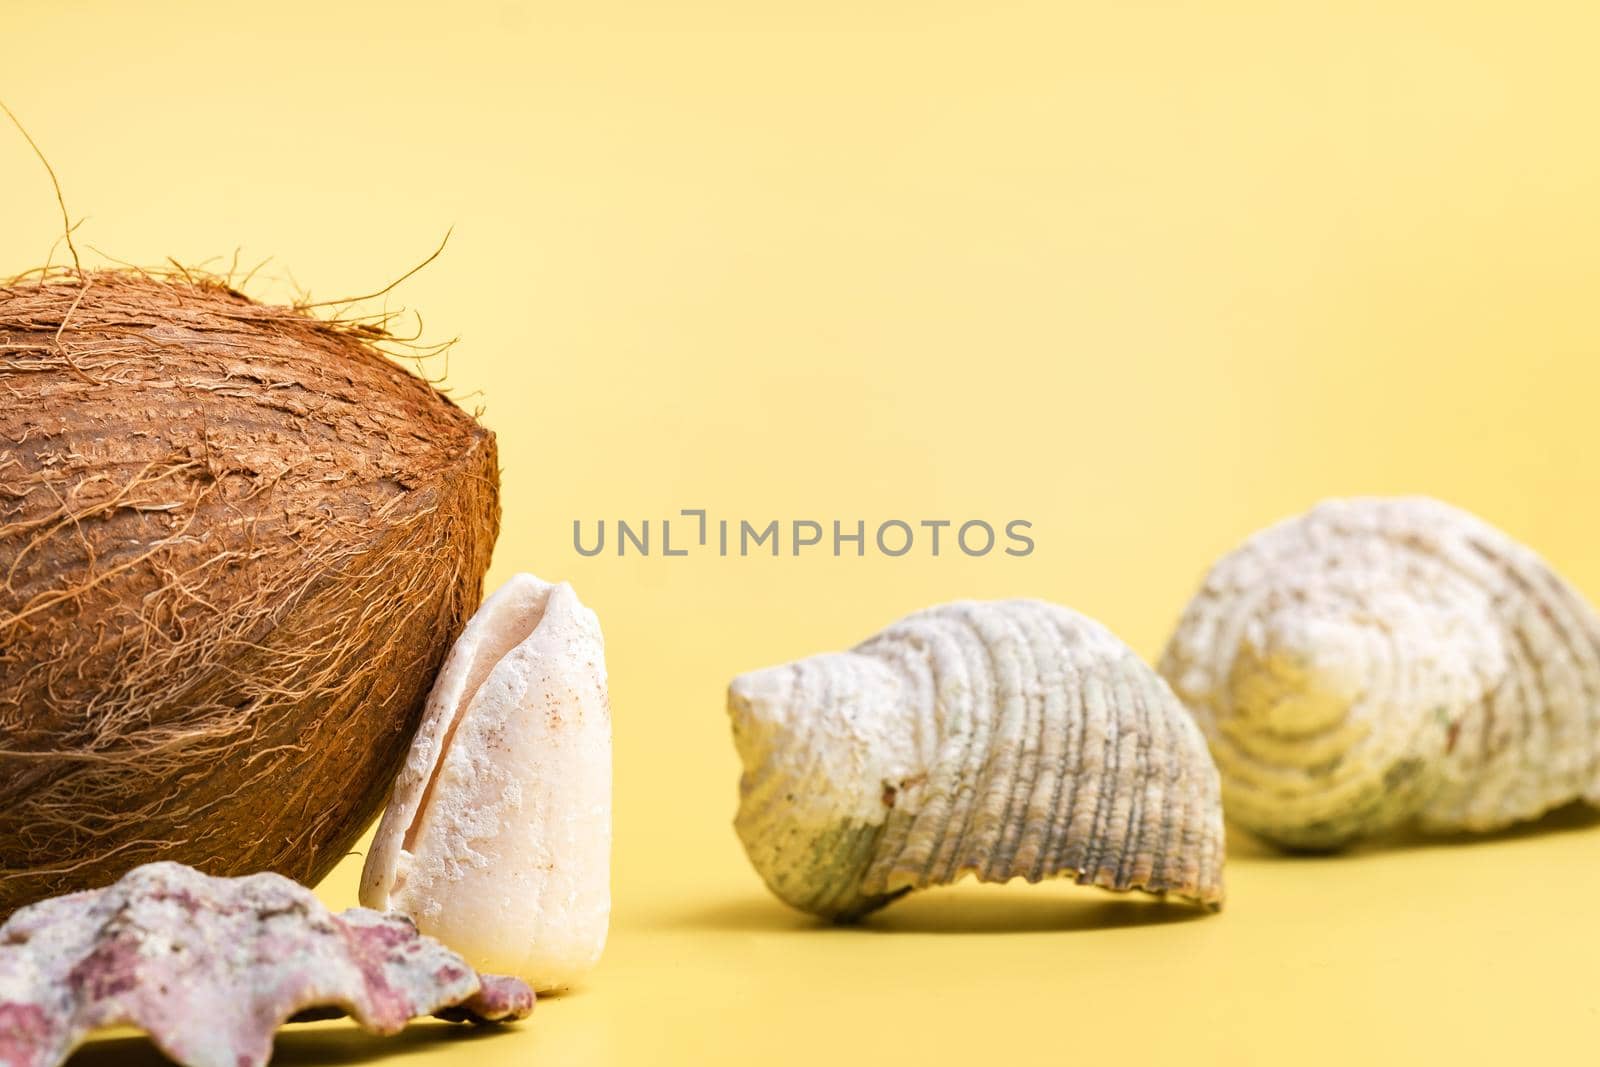 Whole Coconuts and shells on a yellow background .Marine theme.